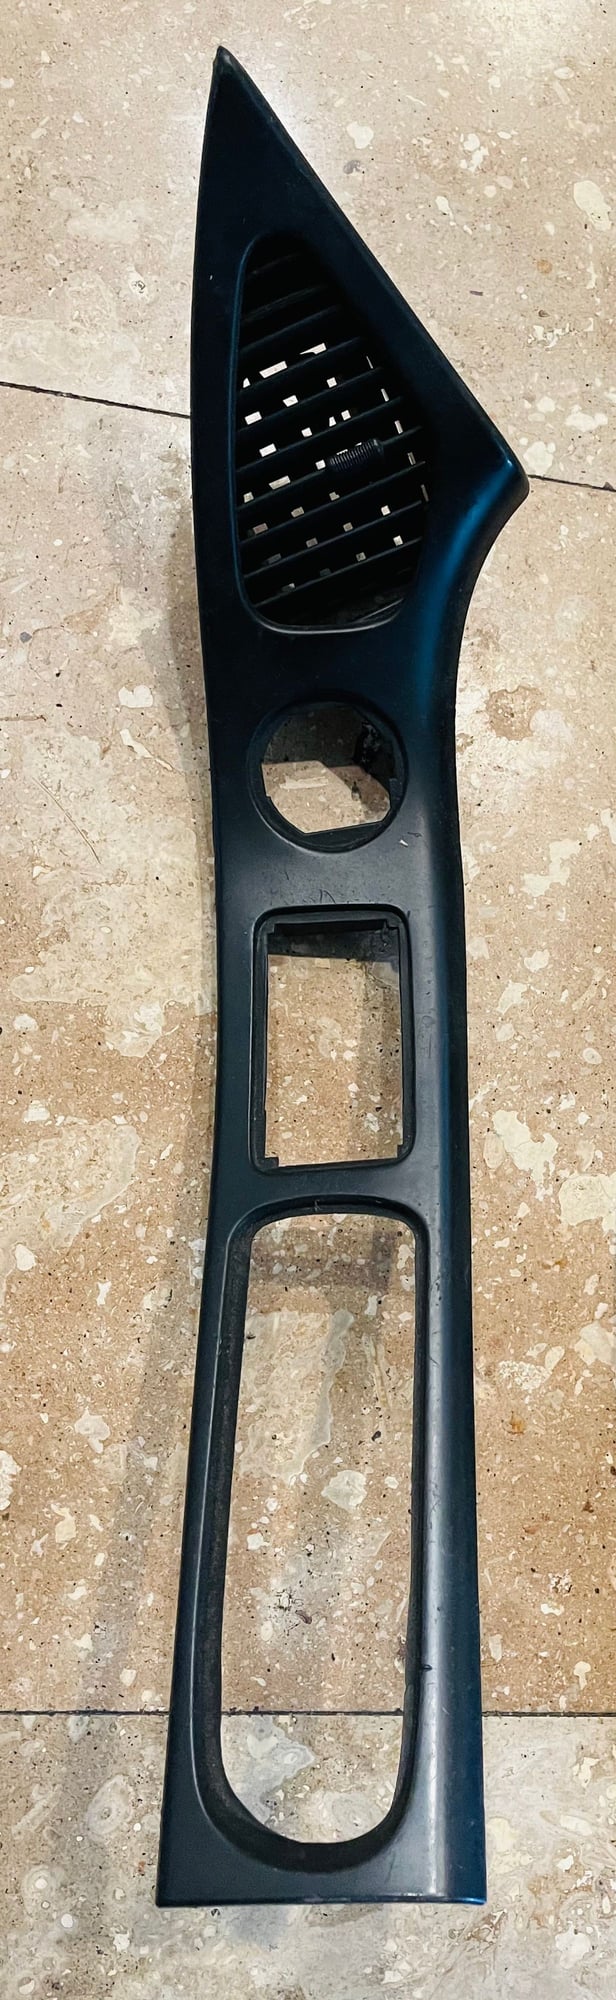 Interior/Upholstery - 1994-1995 Passenger Door Pull/Plastic and 93 Driver side Plastic - Used - 1994 to 1995 Mazda RX-7 - Rsm, CA 92688, United States